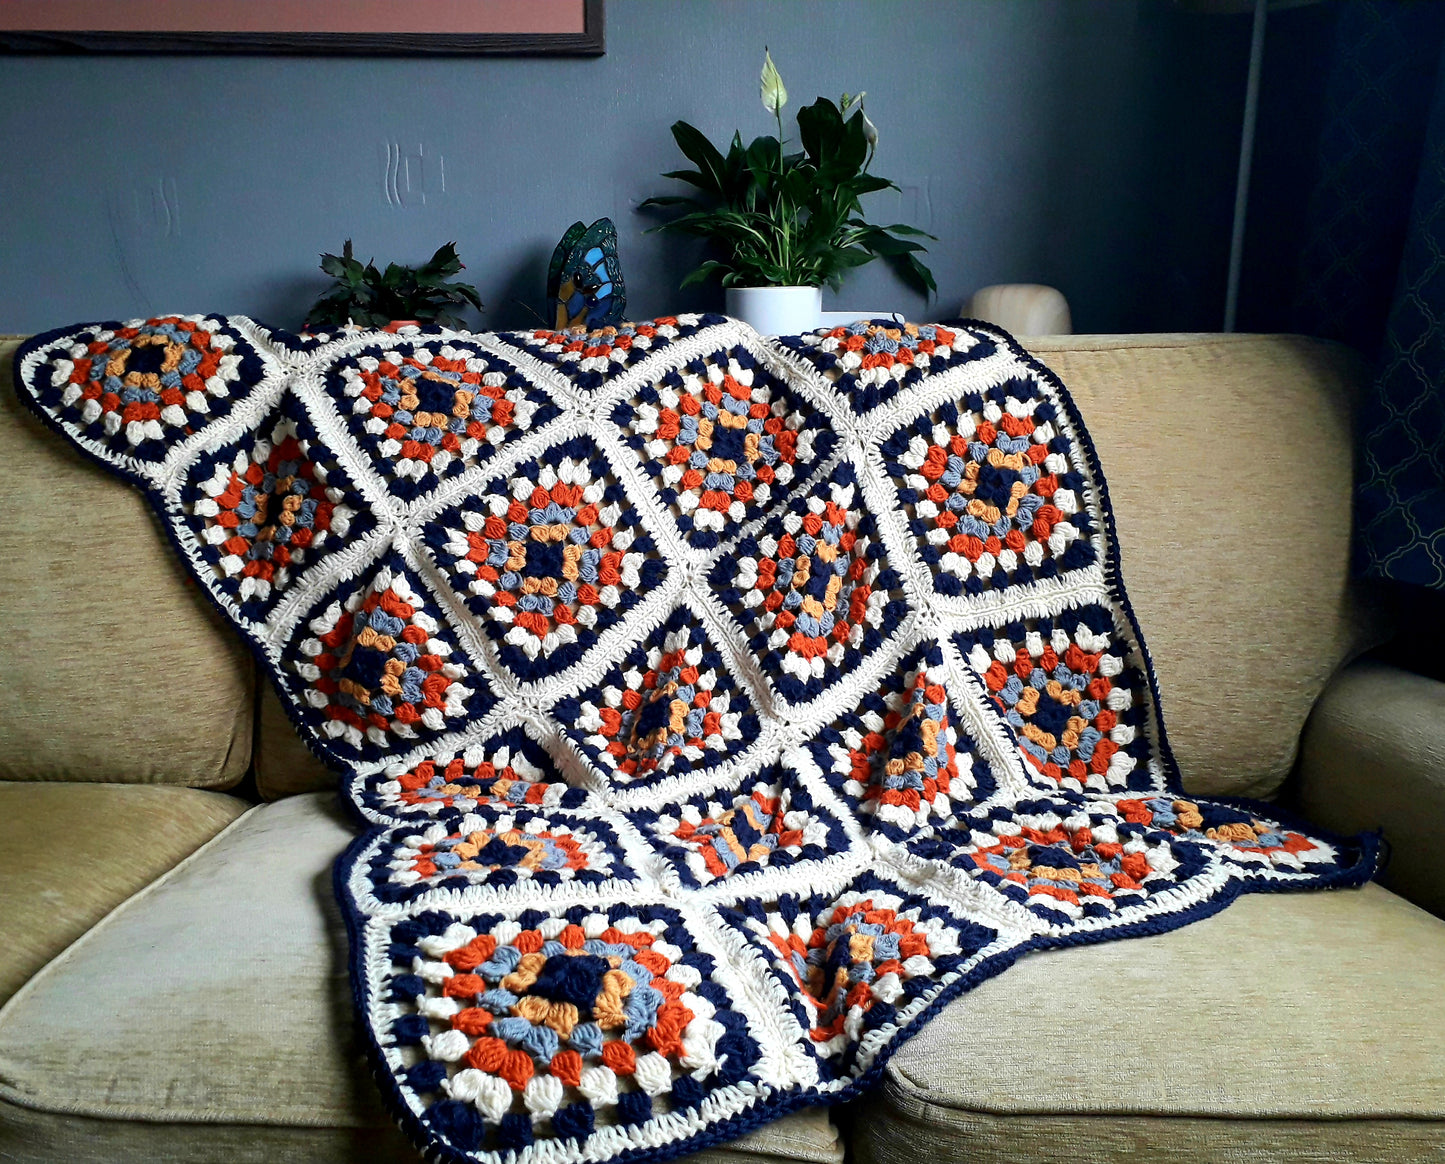 Image shows a granny square style blanket draped across a gold coloured sofa. The blanket has a navy blue border and is made up of 24 individual squares.